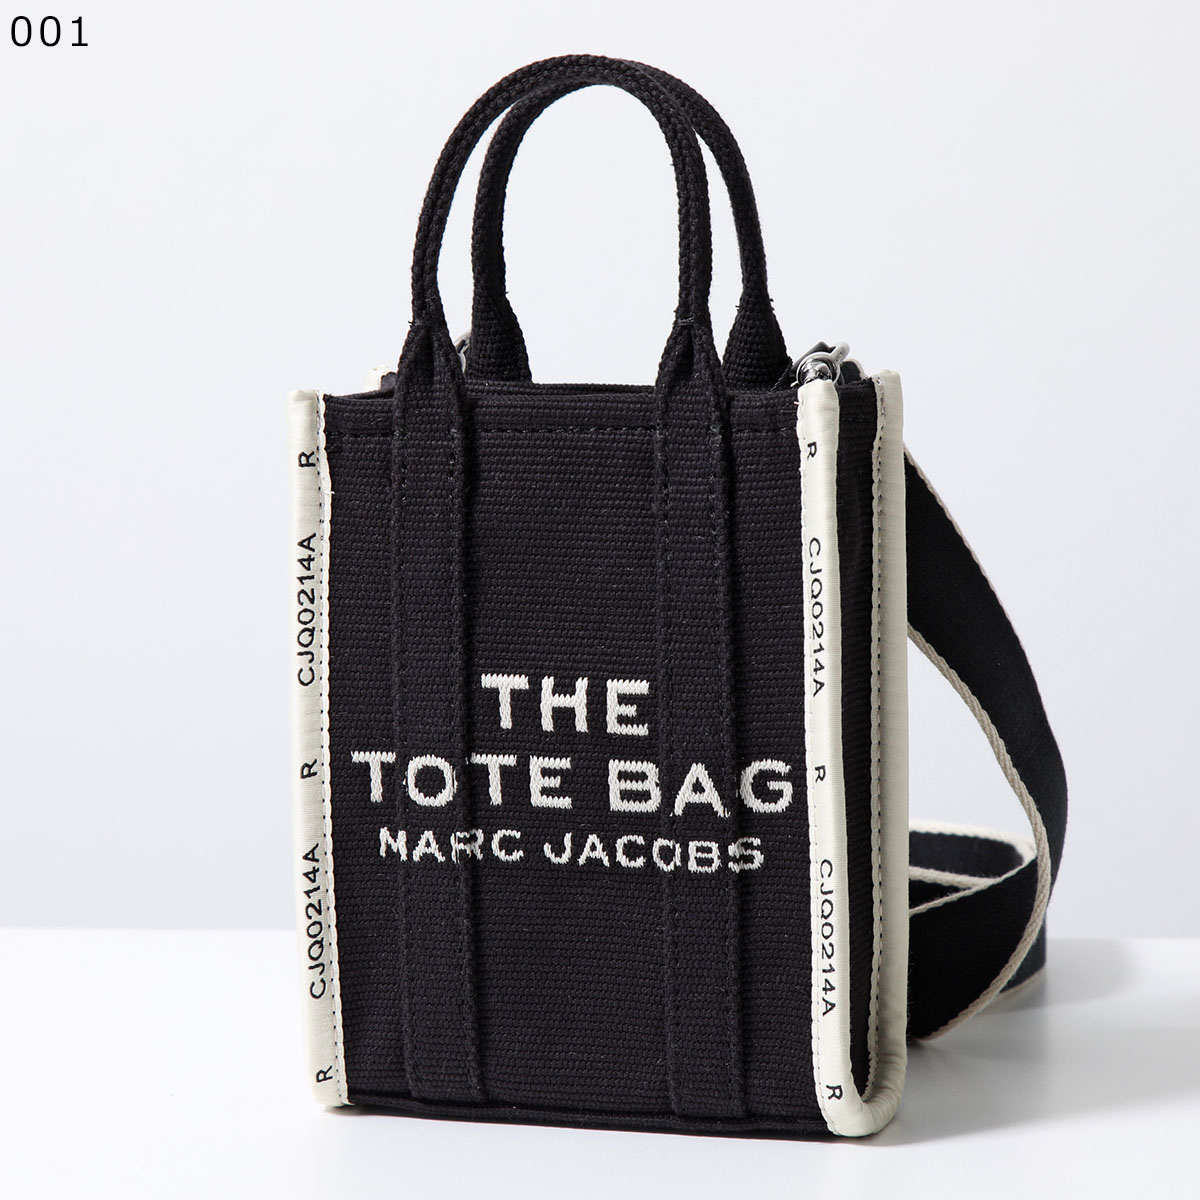 MARC JACOBS マークジェイコブス ミニバッグ THE JACQUARD MINI TOTE 2R3HCR027H01 レディース ジャガード フォンバッグ ロゴ トート 鞄 カラー3色｜s-musee｜02